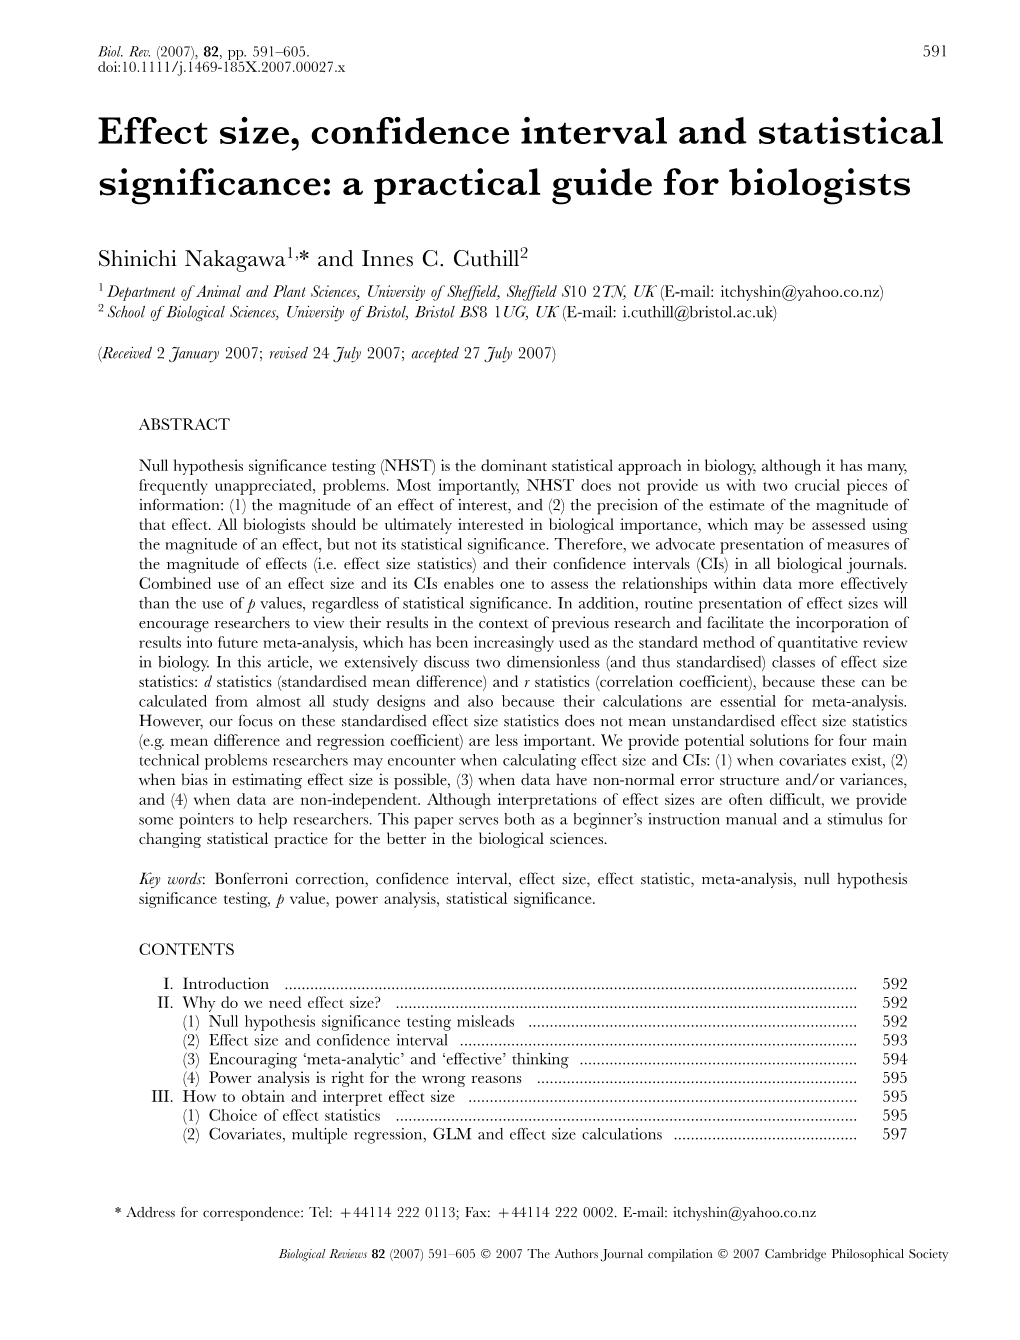 Effect Size, Confidence Interval and Statistical Significance: a Practical Guide for Biologists